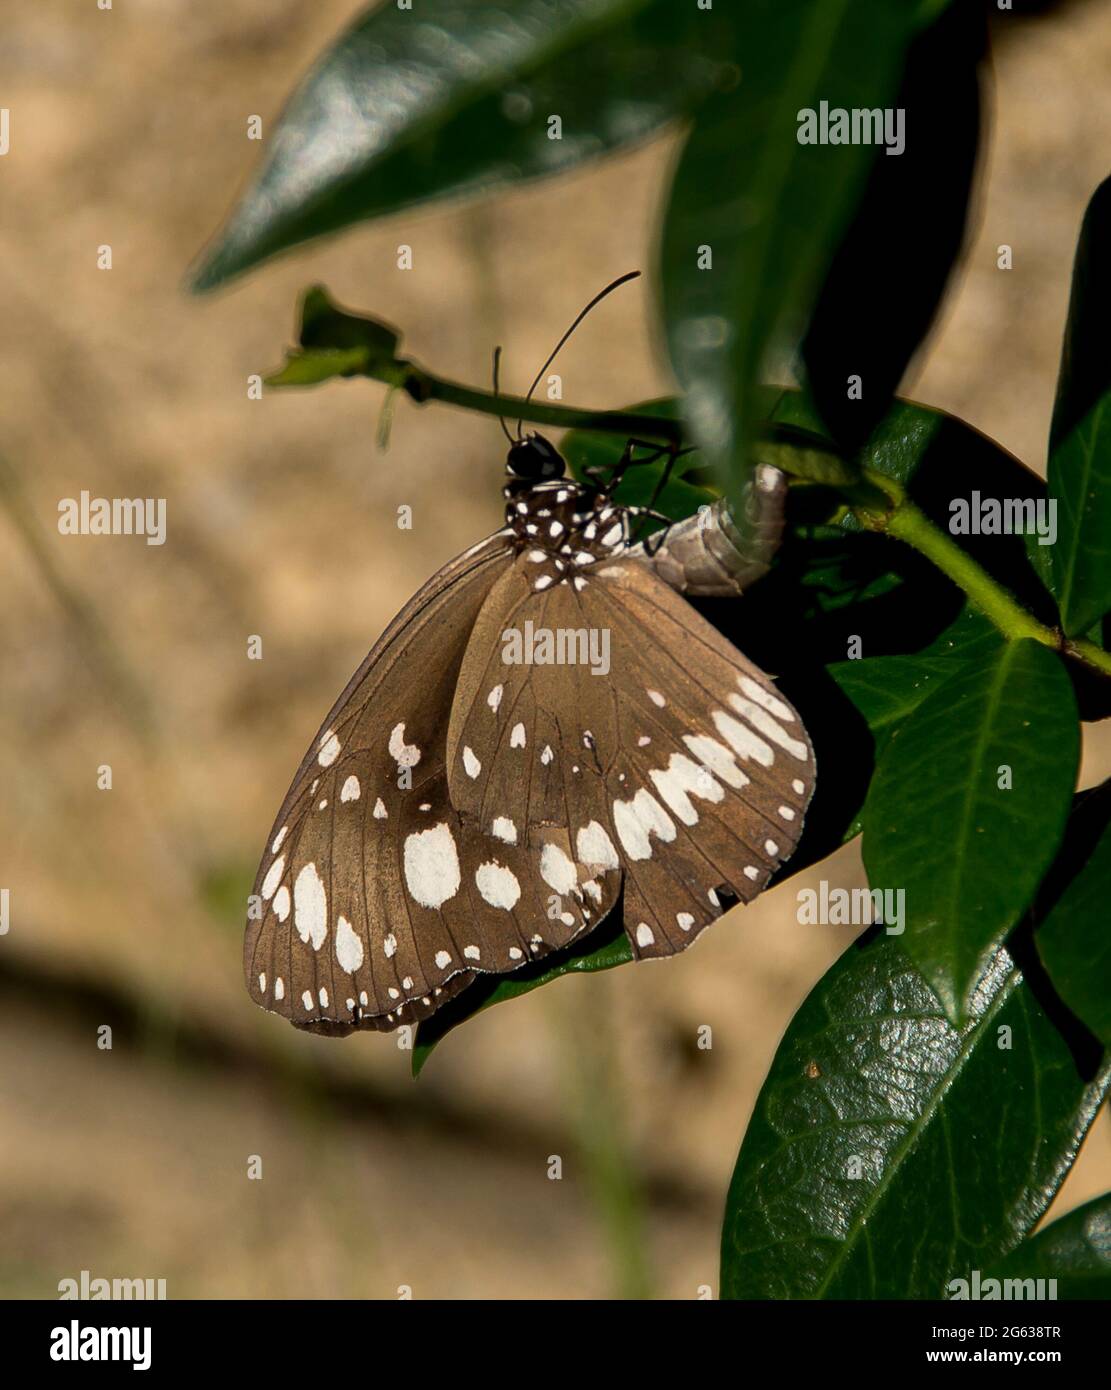 Dark brown and white Common Crow butterfly, Oleander butterfly (Euploea core) resting on green leaves in a garden in Queensland, Australia Stock Photo